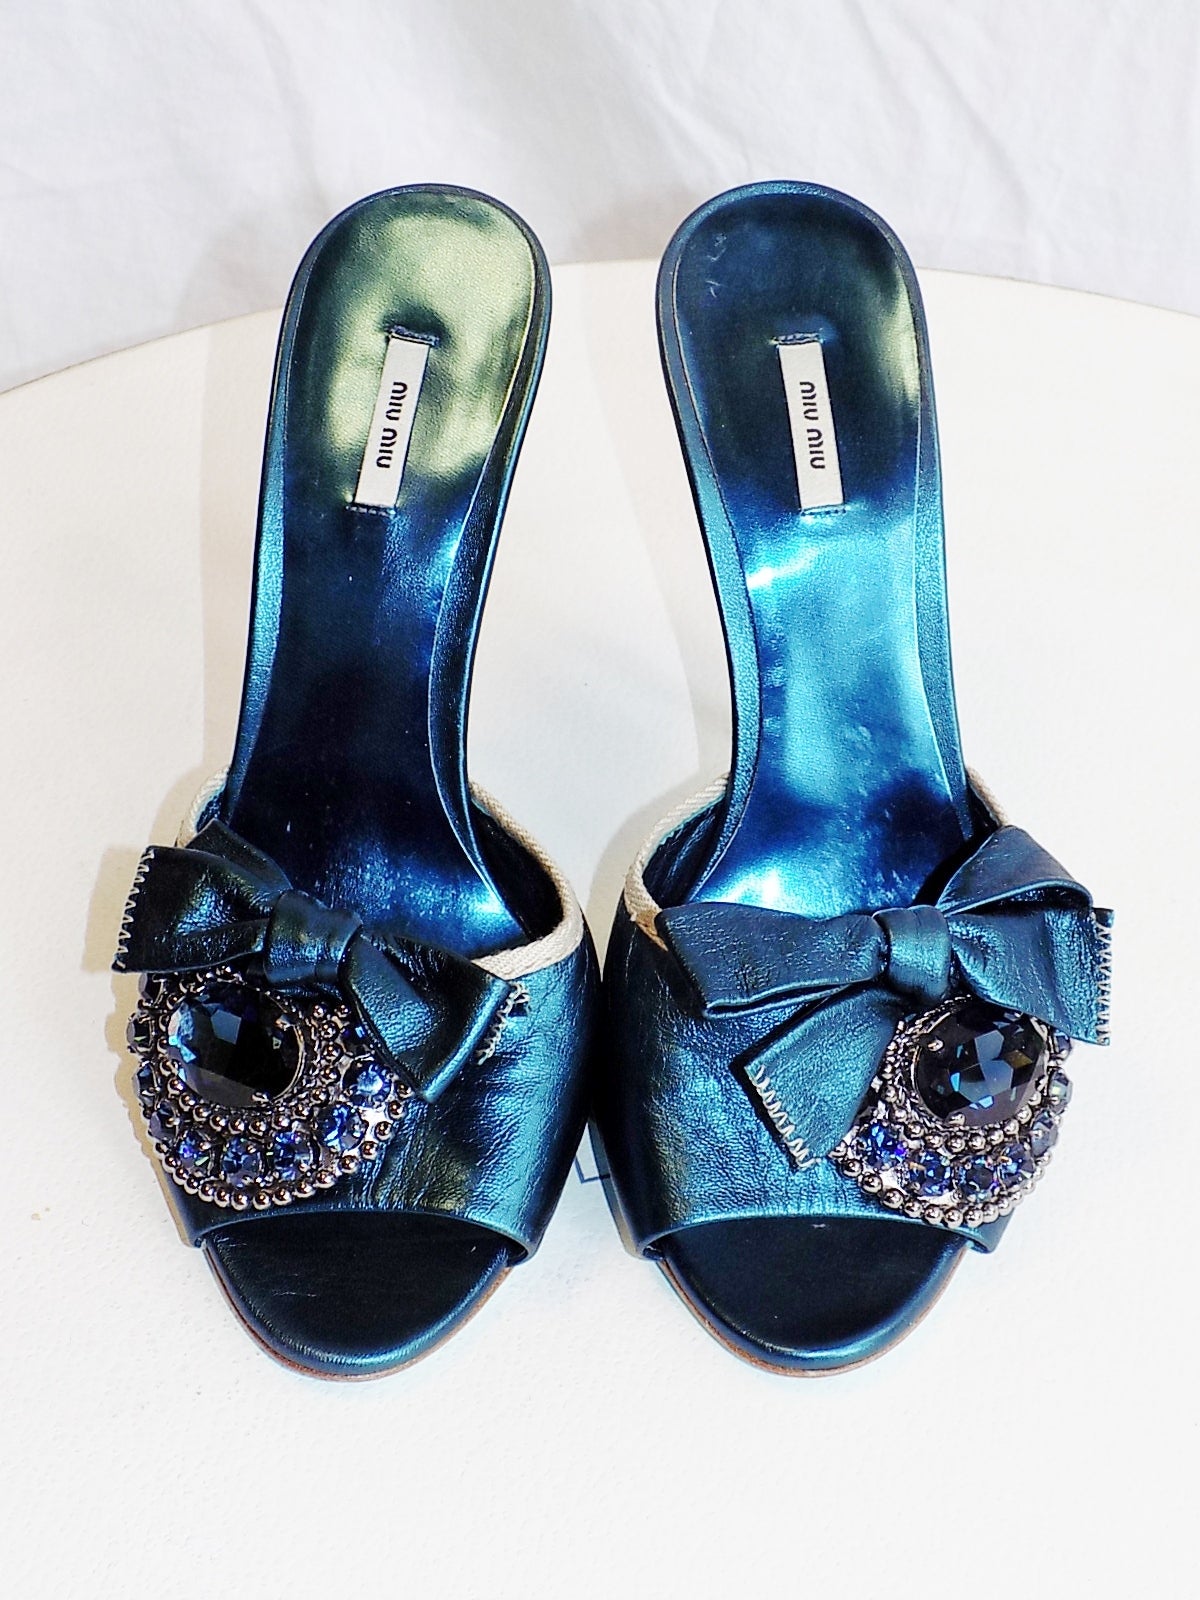 So cute and so super  sexy!! . Very soft leather. . Heel 5 Inches.Large  blue crystal jeweled shoe pin with bow.  Worn once ! pristine condition. Size 38